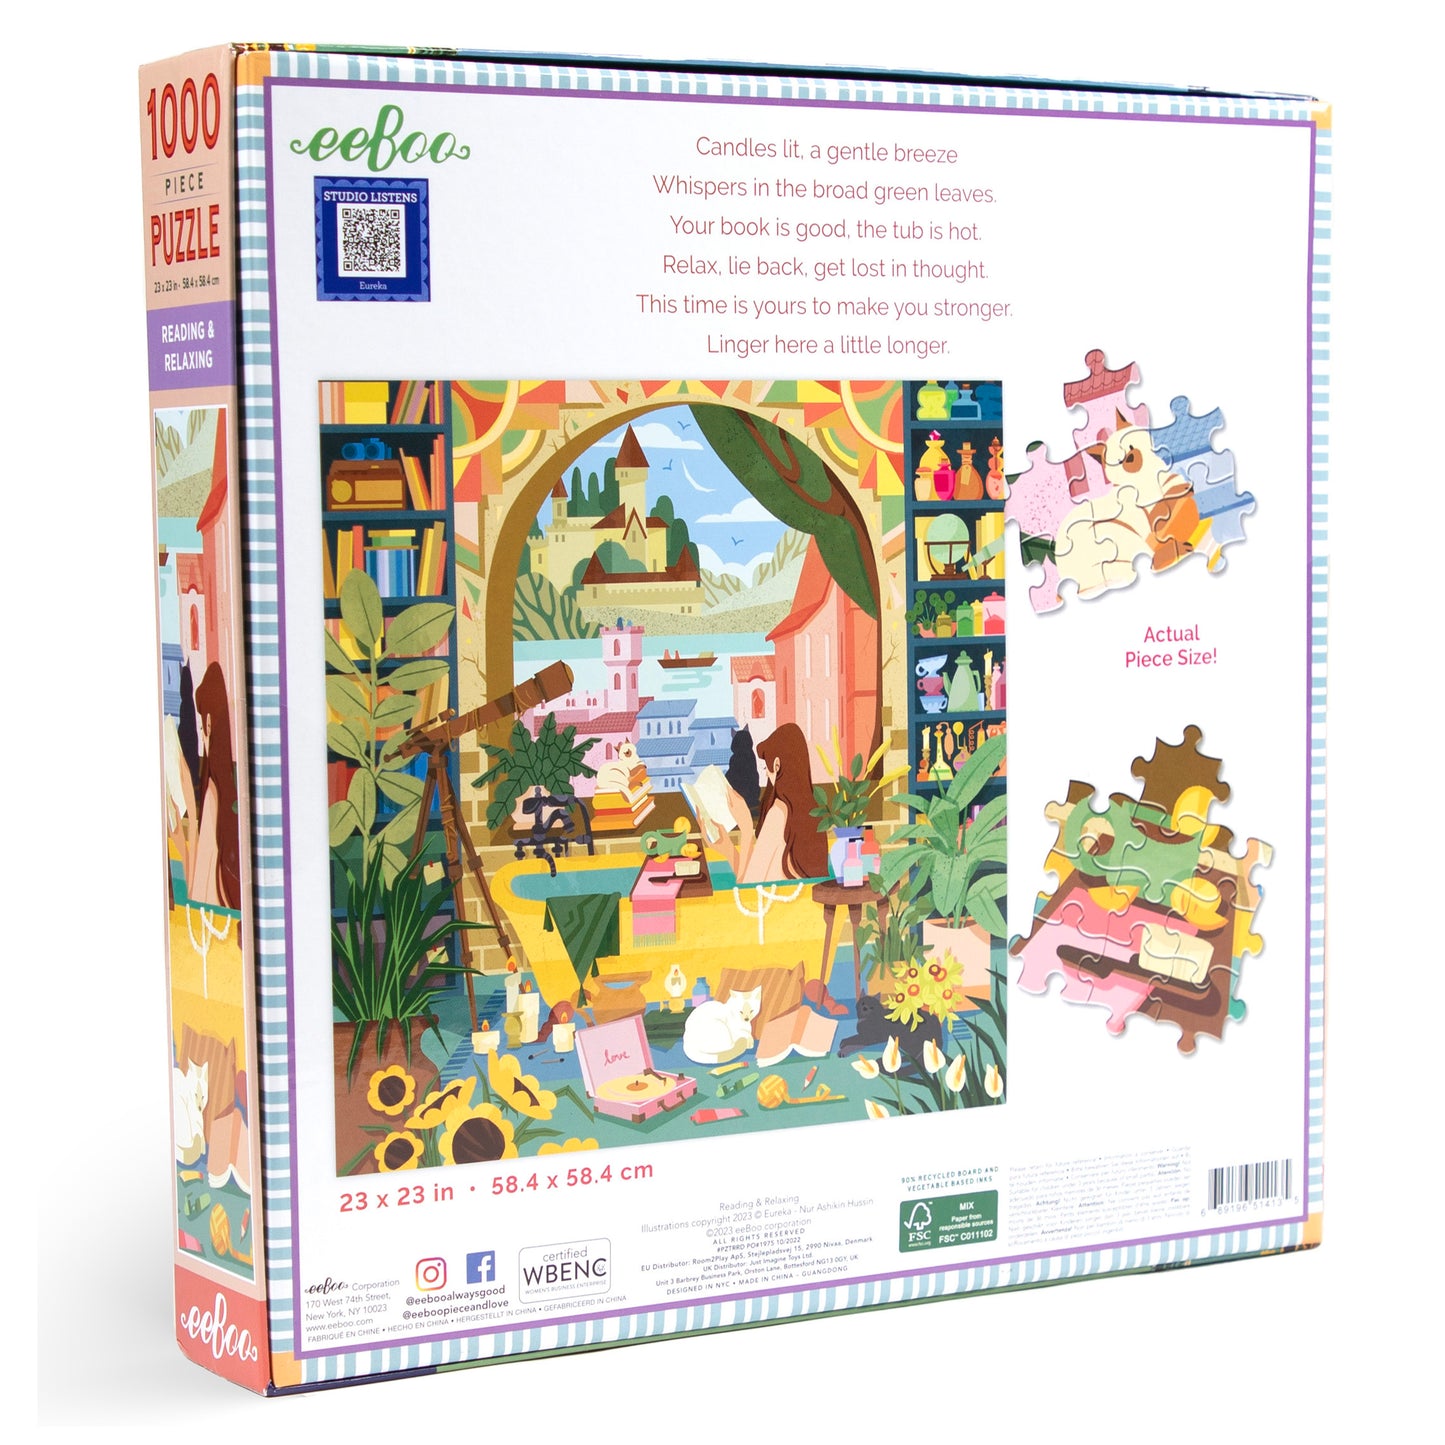 Reading & Relaxing 1000 Piece Jigsaw Puzzle | Unique Self Care Gifts for Women | Features Castles, Cats, Books, & Plants